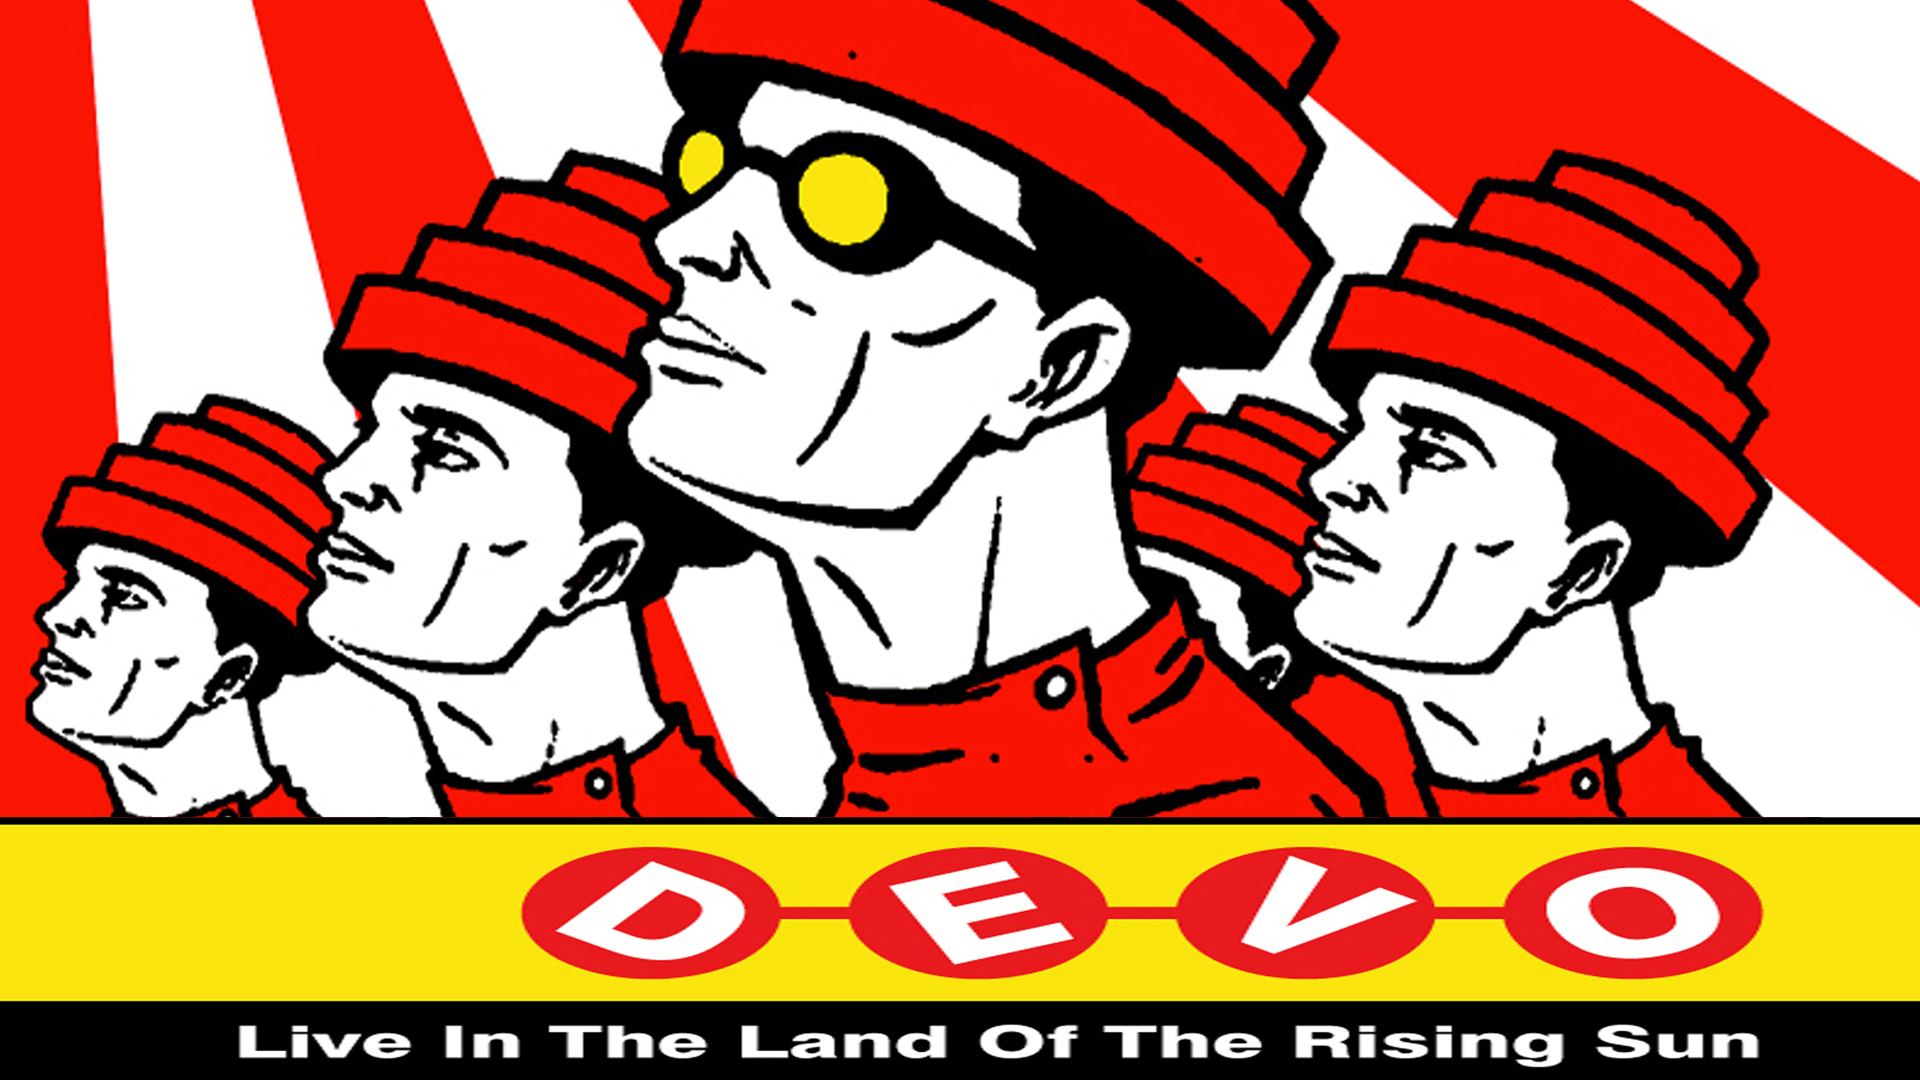 Devo - Live In The Land Of The Rising Sun: Japan 2003 - Musey TV